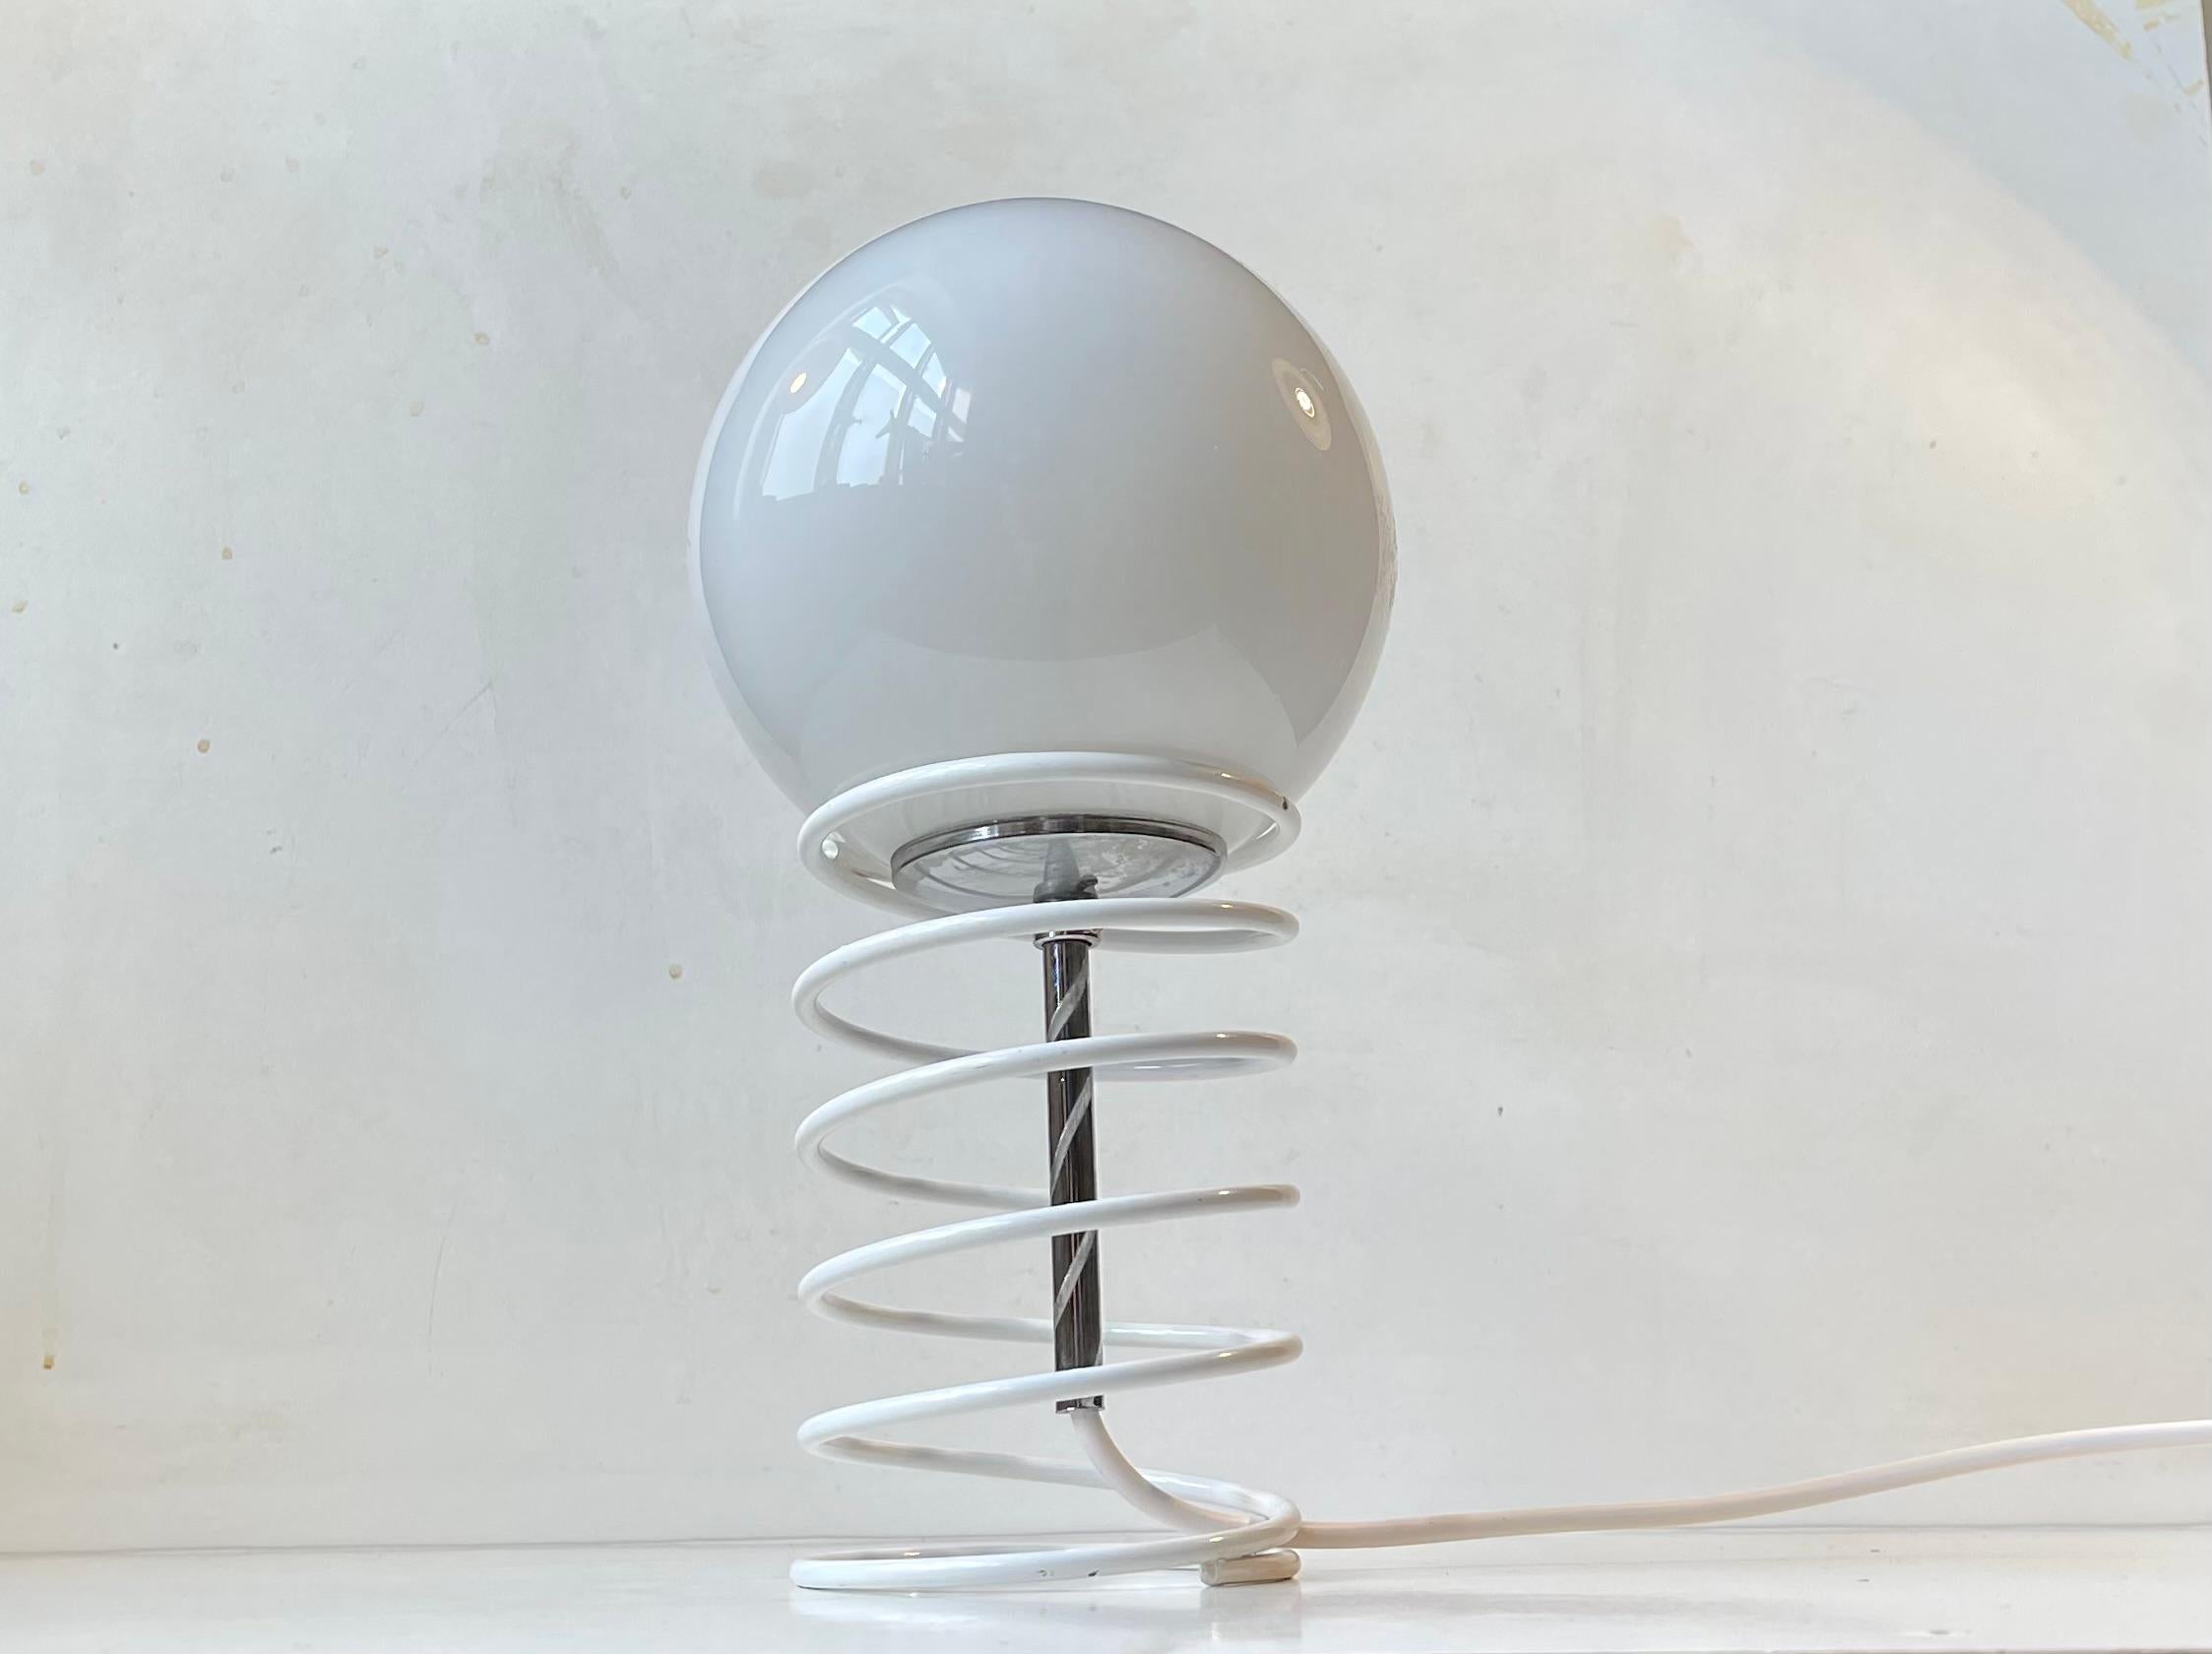 A simple small table light made from a steel spring in white lacquer freely holding an opaline glass sphere in a chrome setting. It was manufactured by Bell in Denmark circa 1980-90. Reminiscent in style to Verner Panton and Fase Spain.